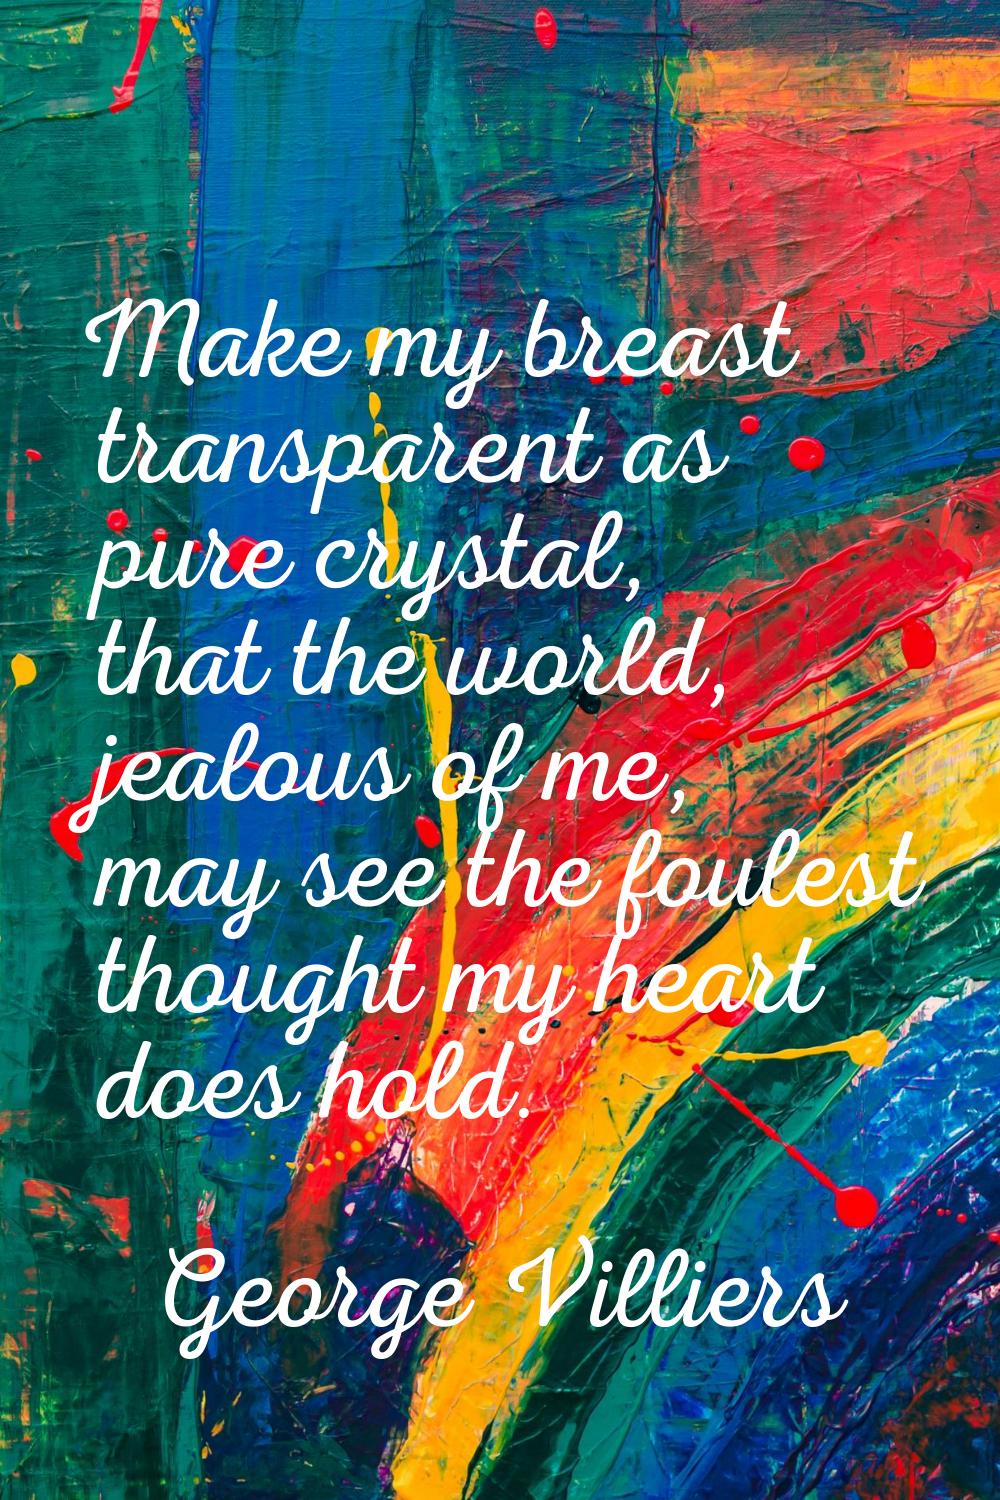 Make my breast transparent as pure crystal, that the world, jealous of me, may see the foulest thou